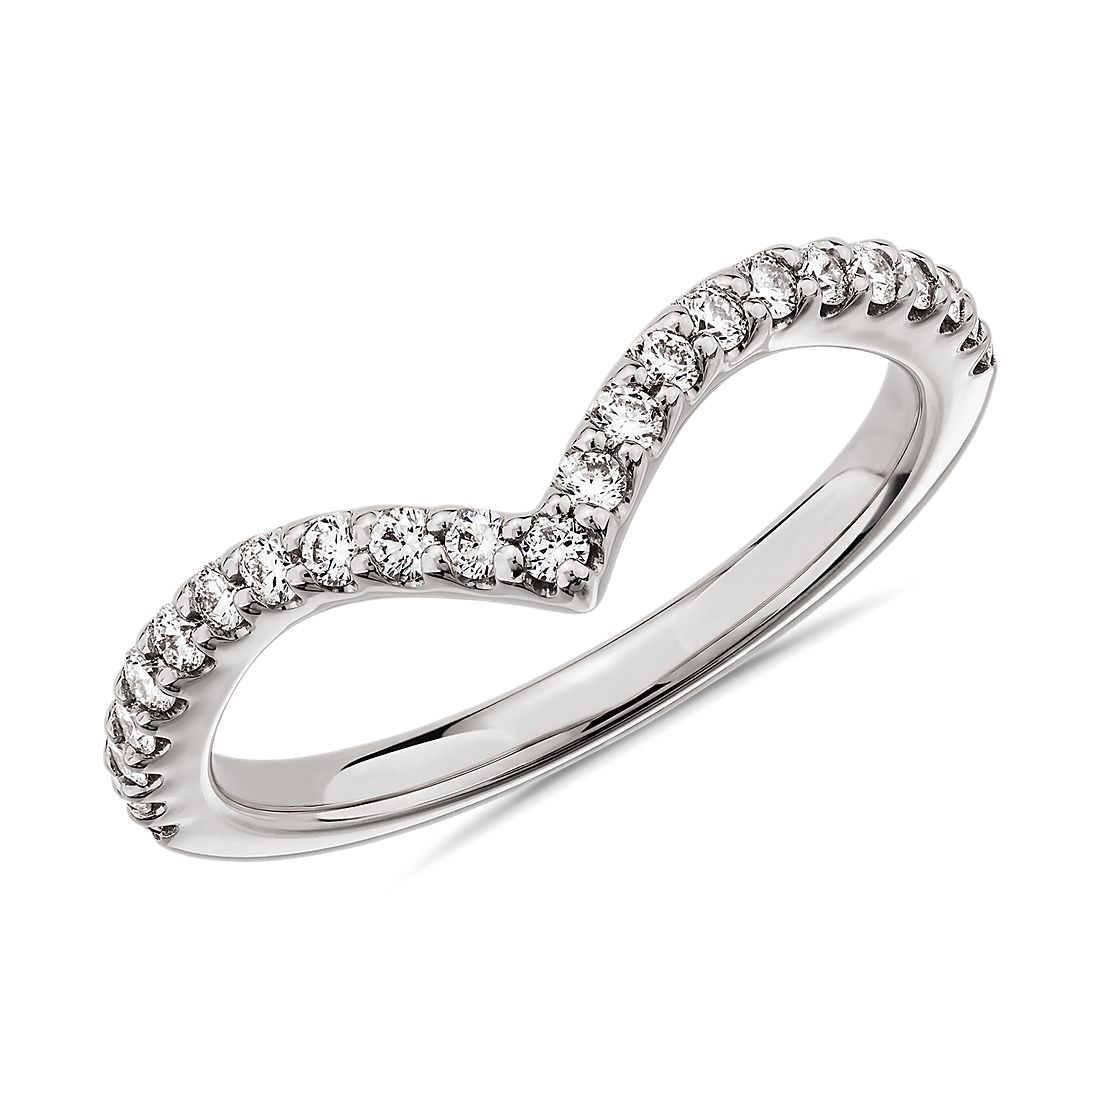 Evacuatie Transparant bus Contemporary V-Shaped Diamond Wedding Ring in 14k White Gold (1/3 ct. tw.)  | Blue Nile